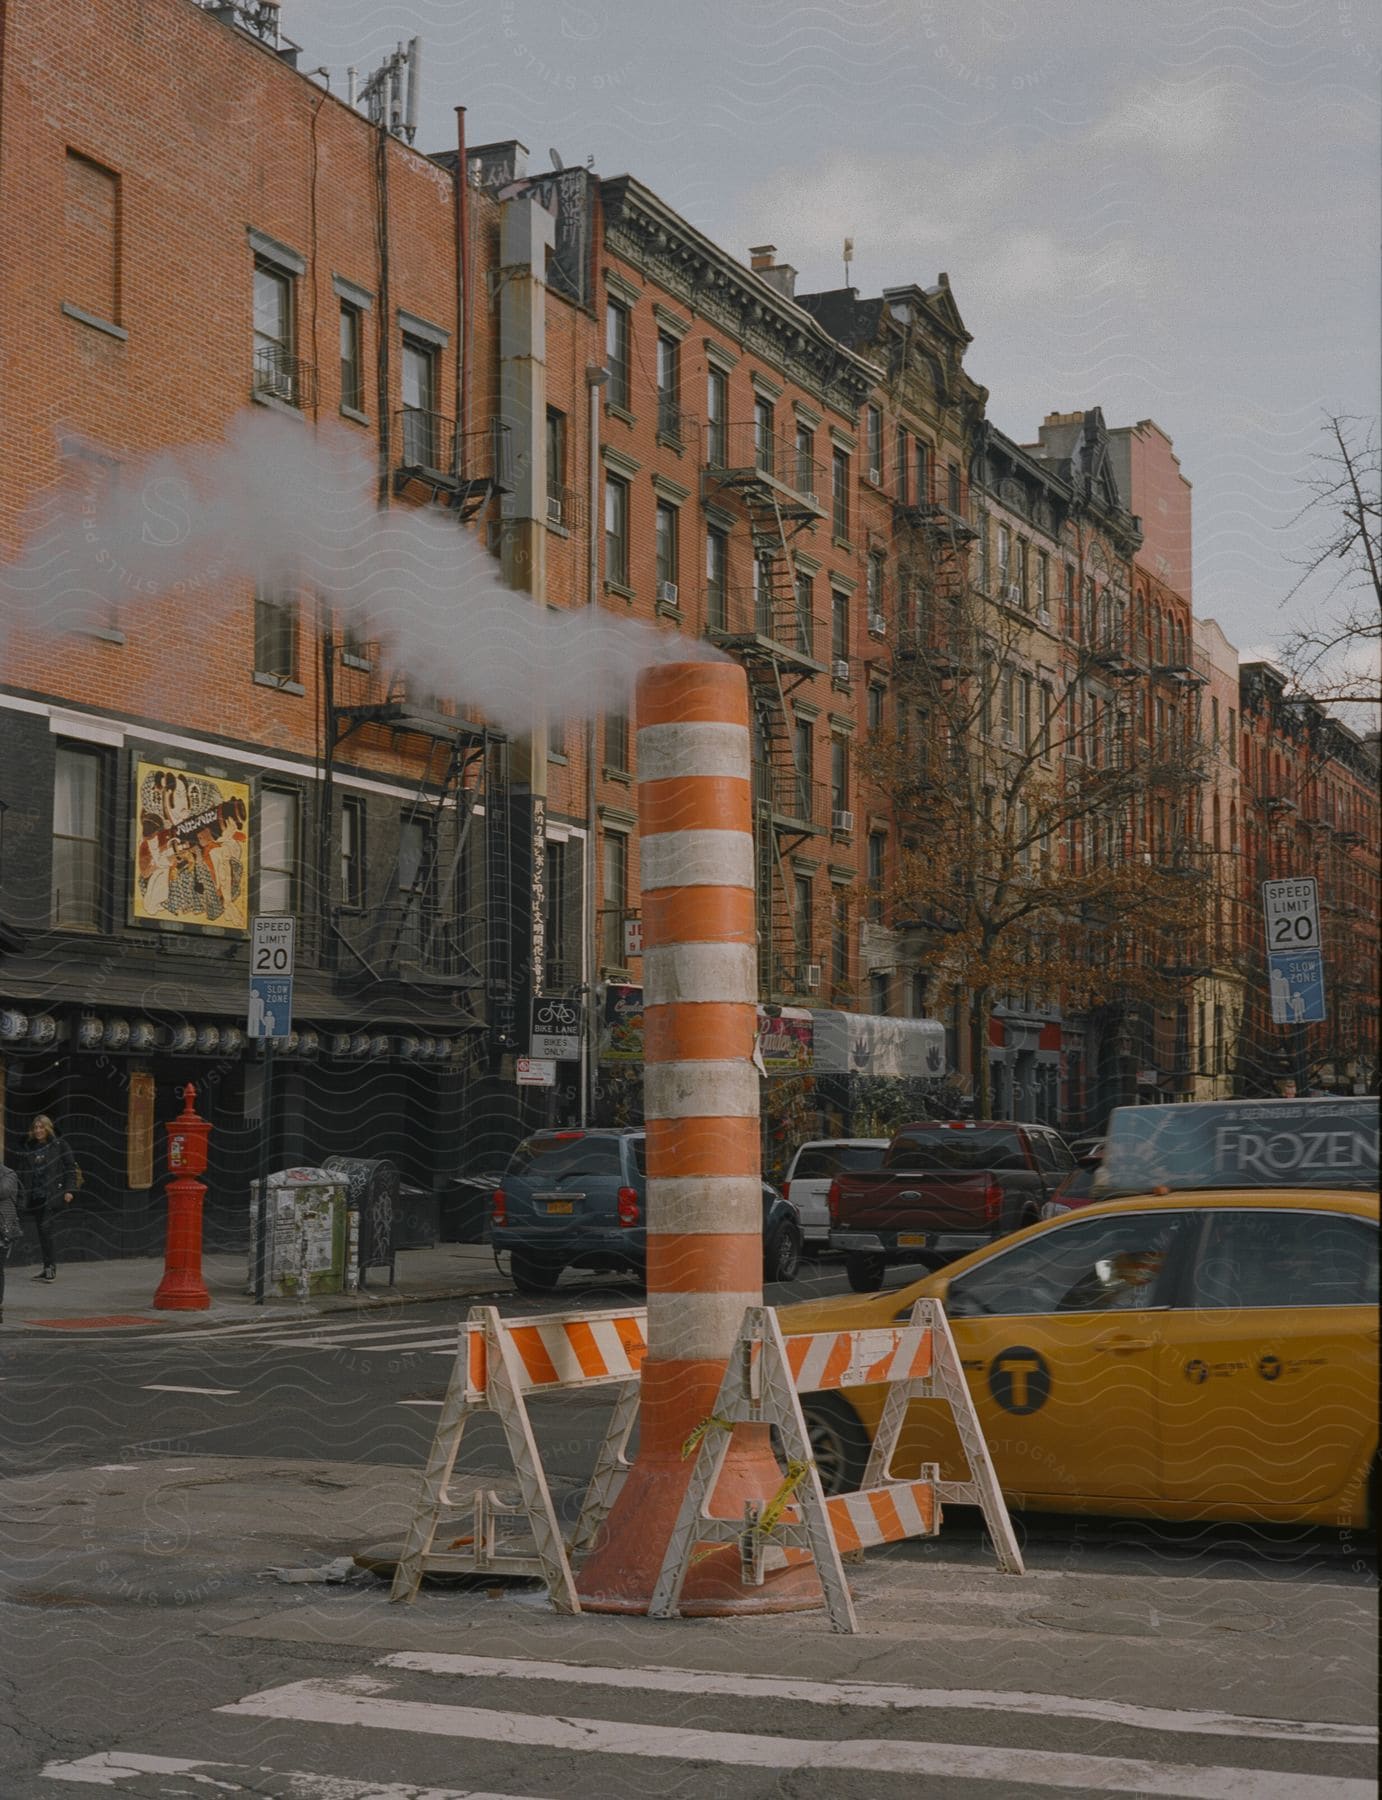 A community with an old building cars moving and a pole evoking smoke in new york